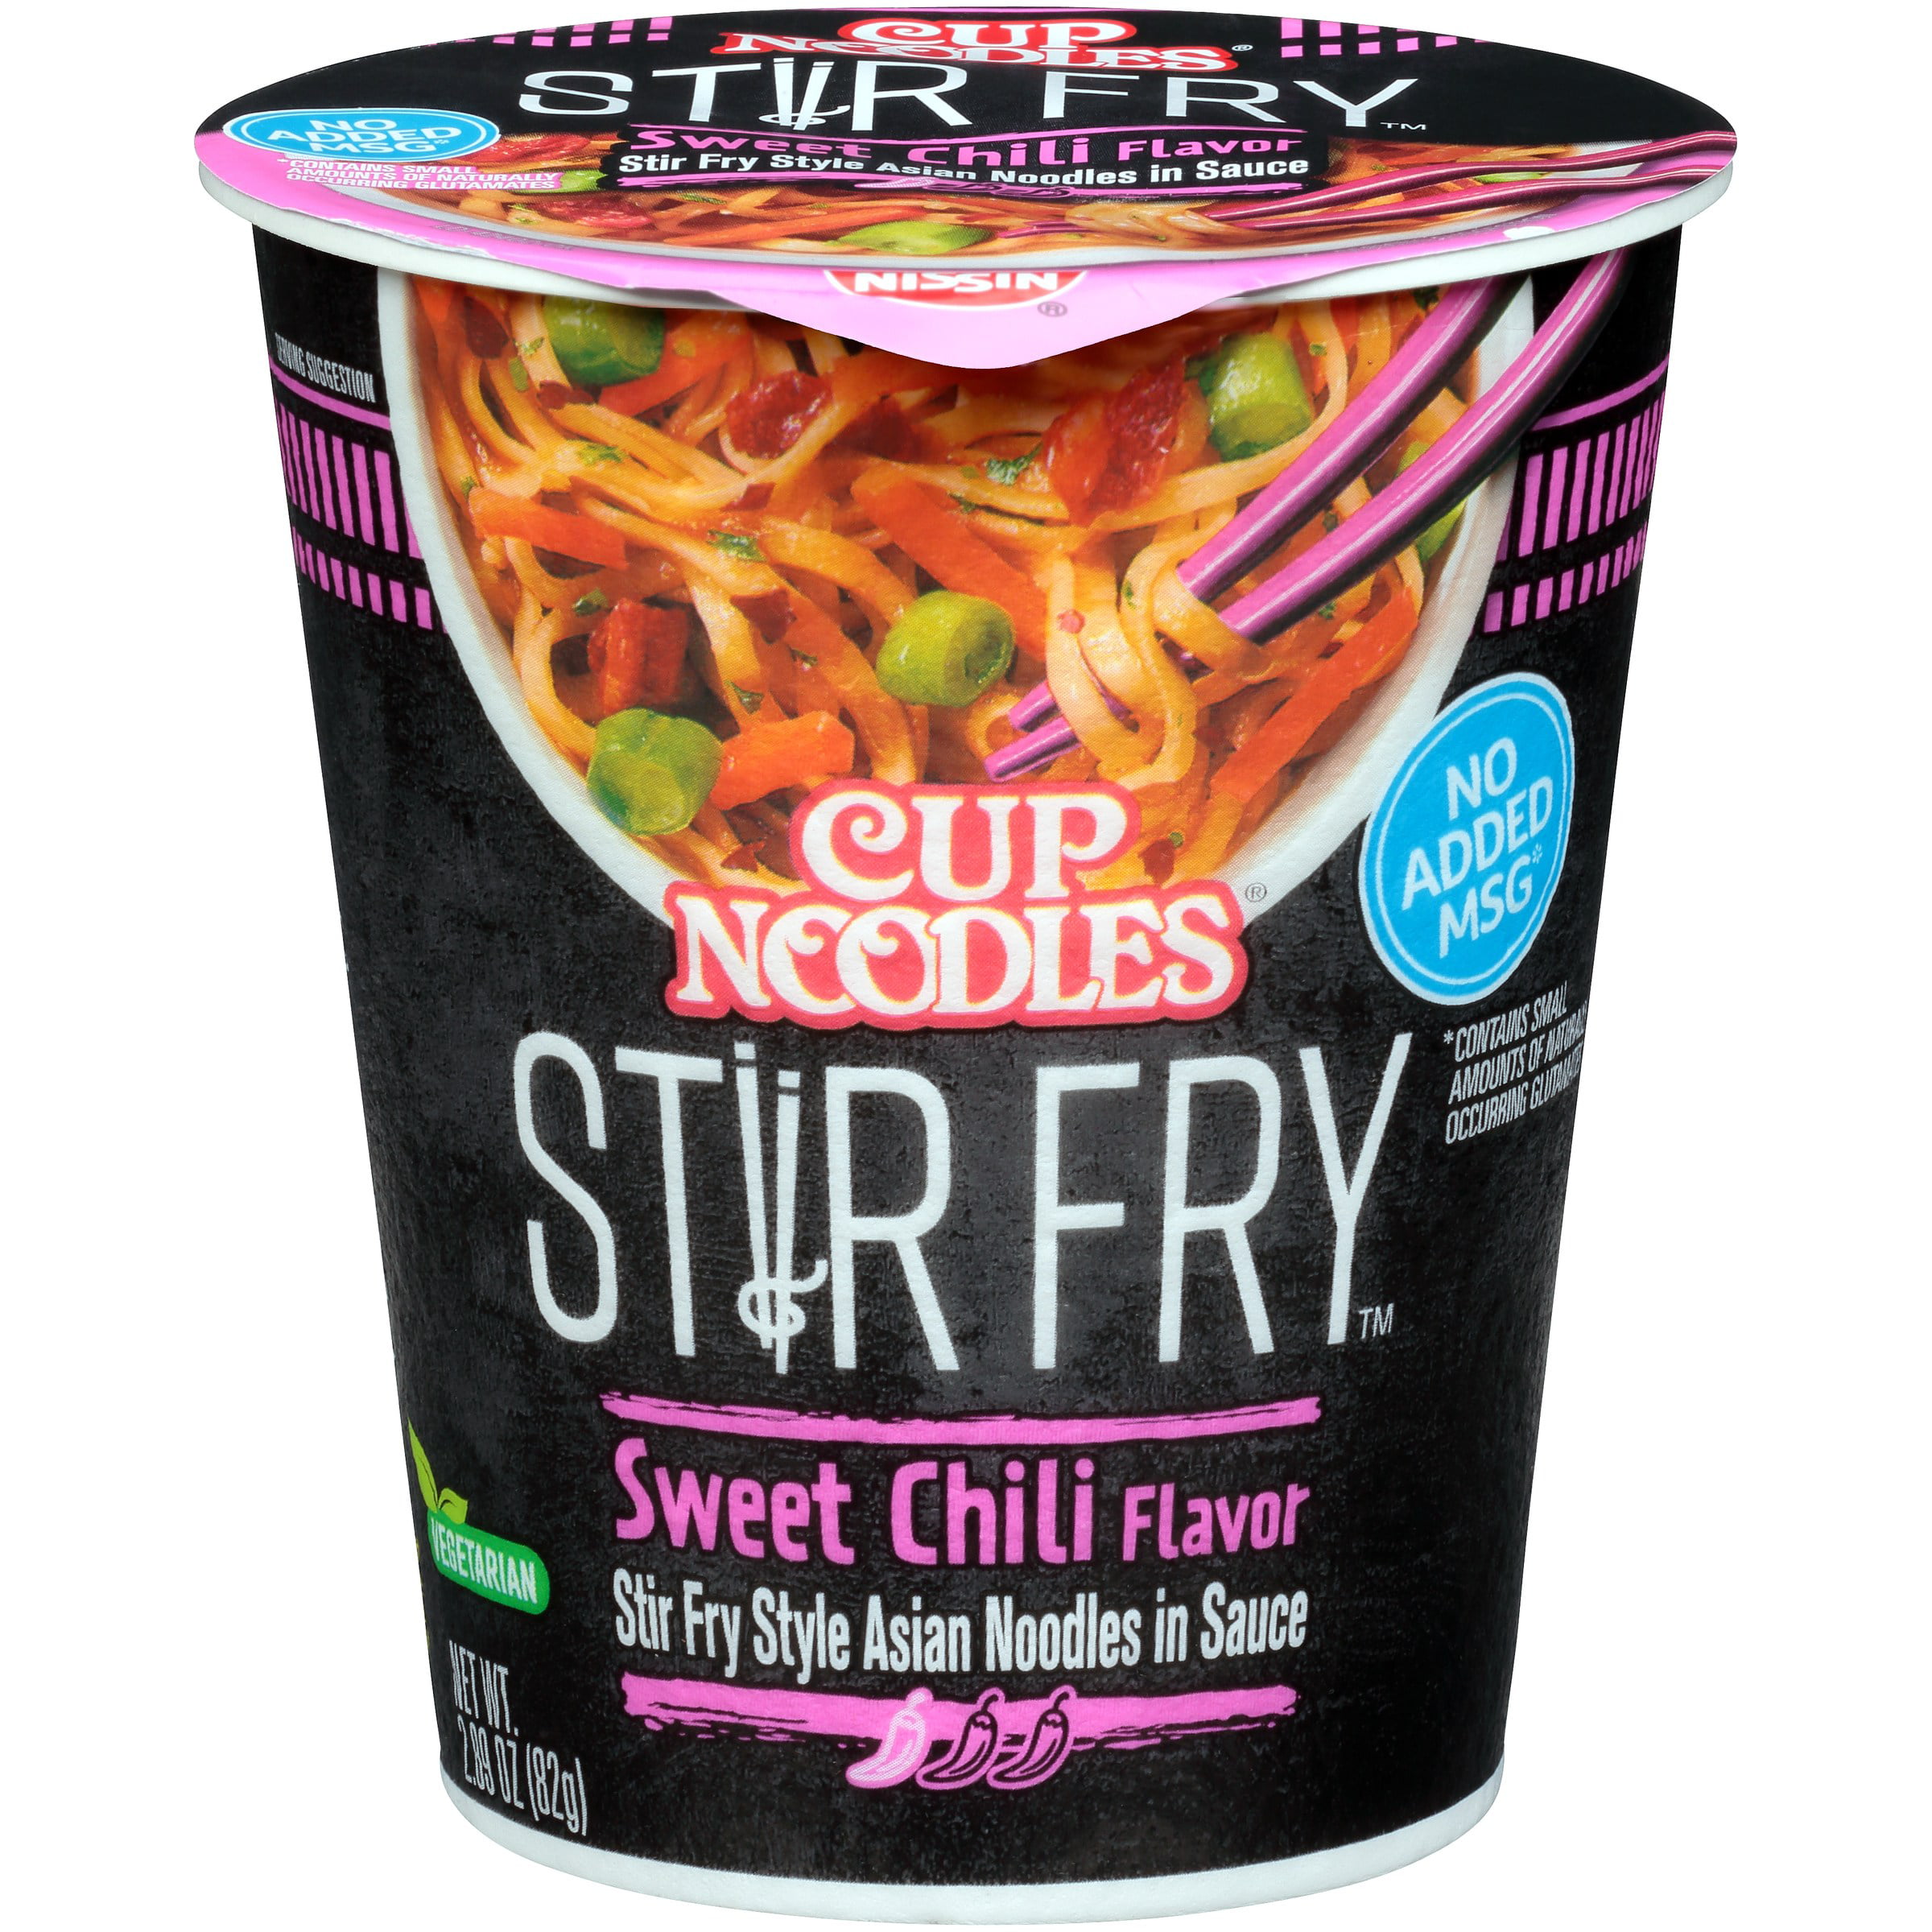 Nissin® Cup Noodles® Stir Fry™ Sweet Chili Flavor Asian Noodles in